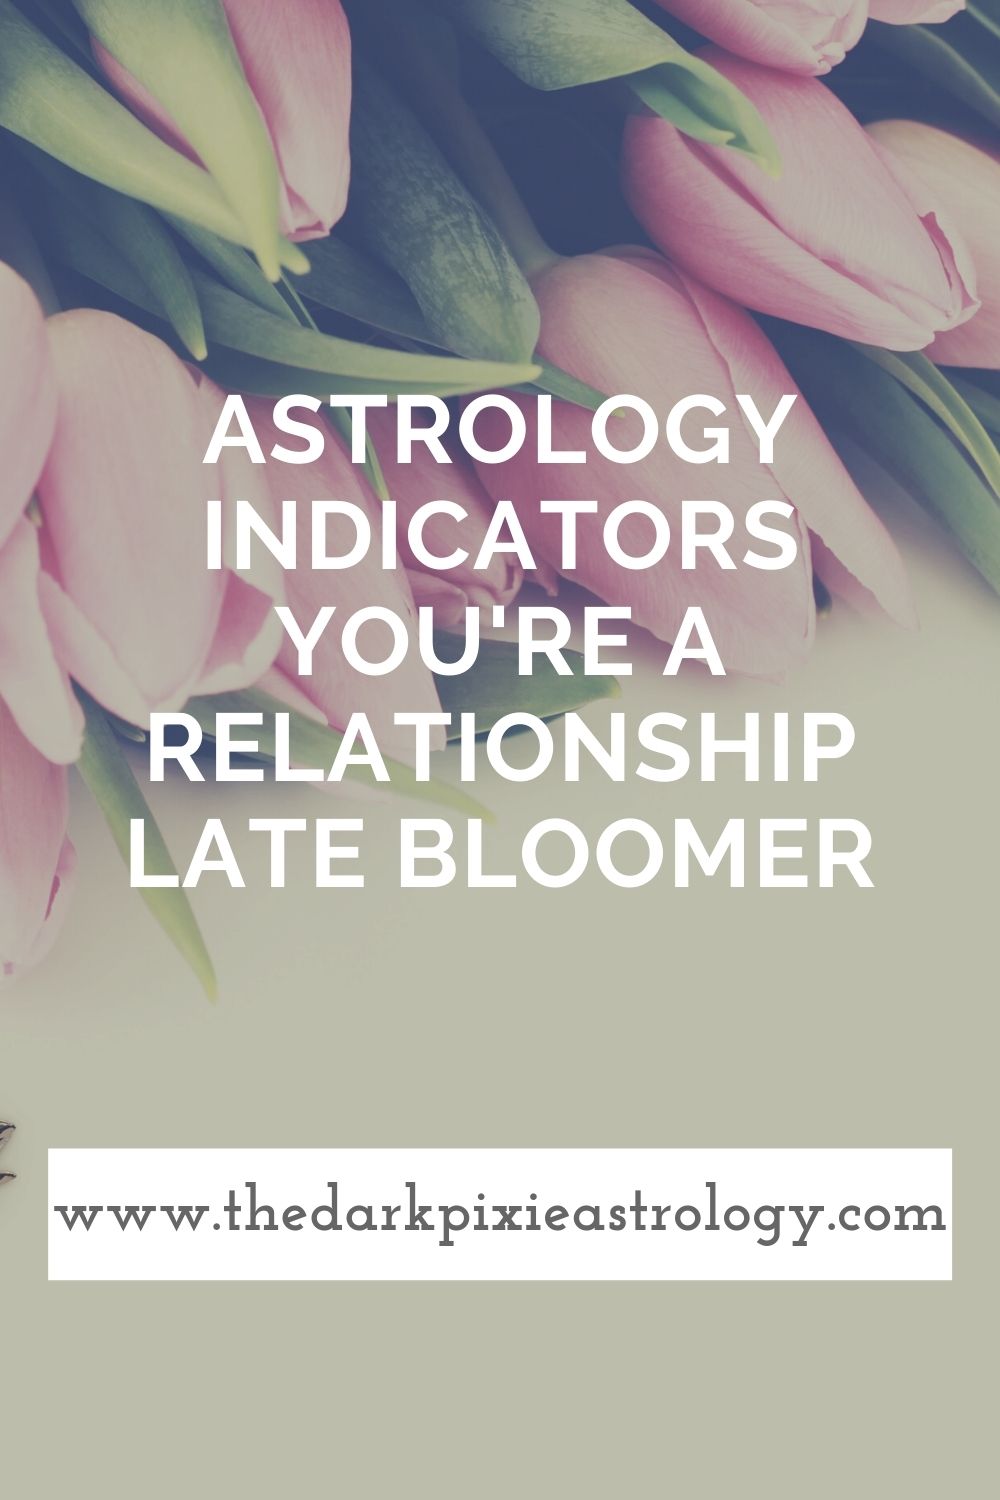 Astrology Indicators You're a Relationship Late Bloomer - The Dark Pixie Astrology